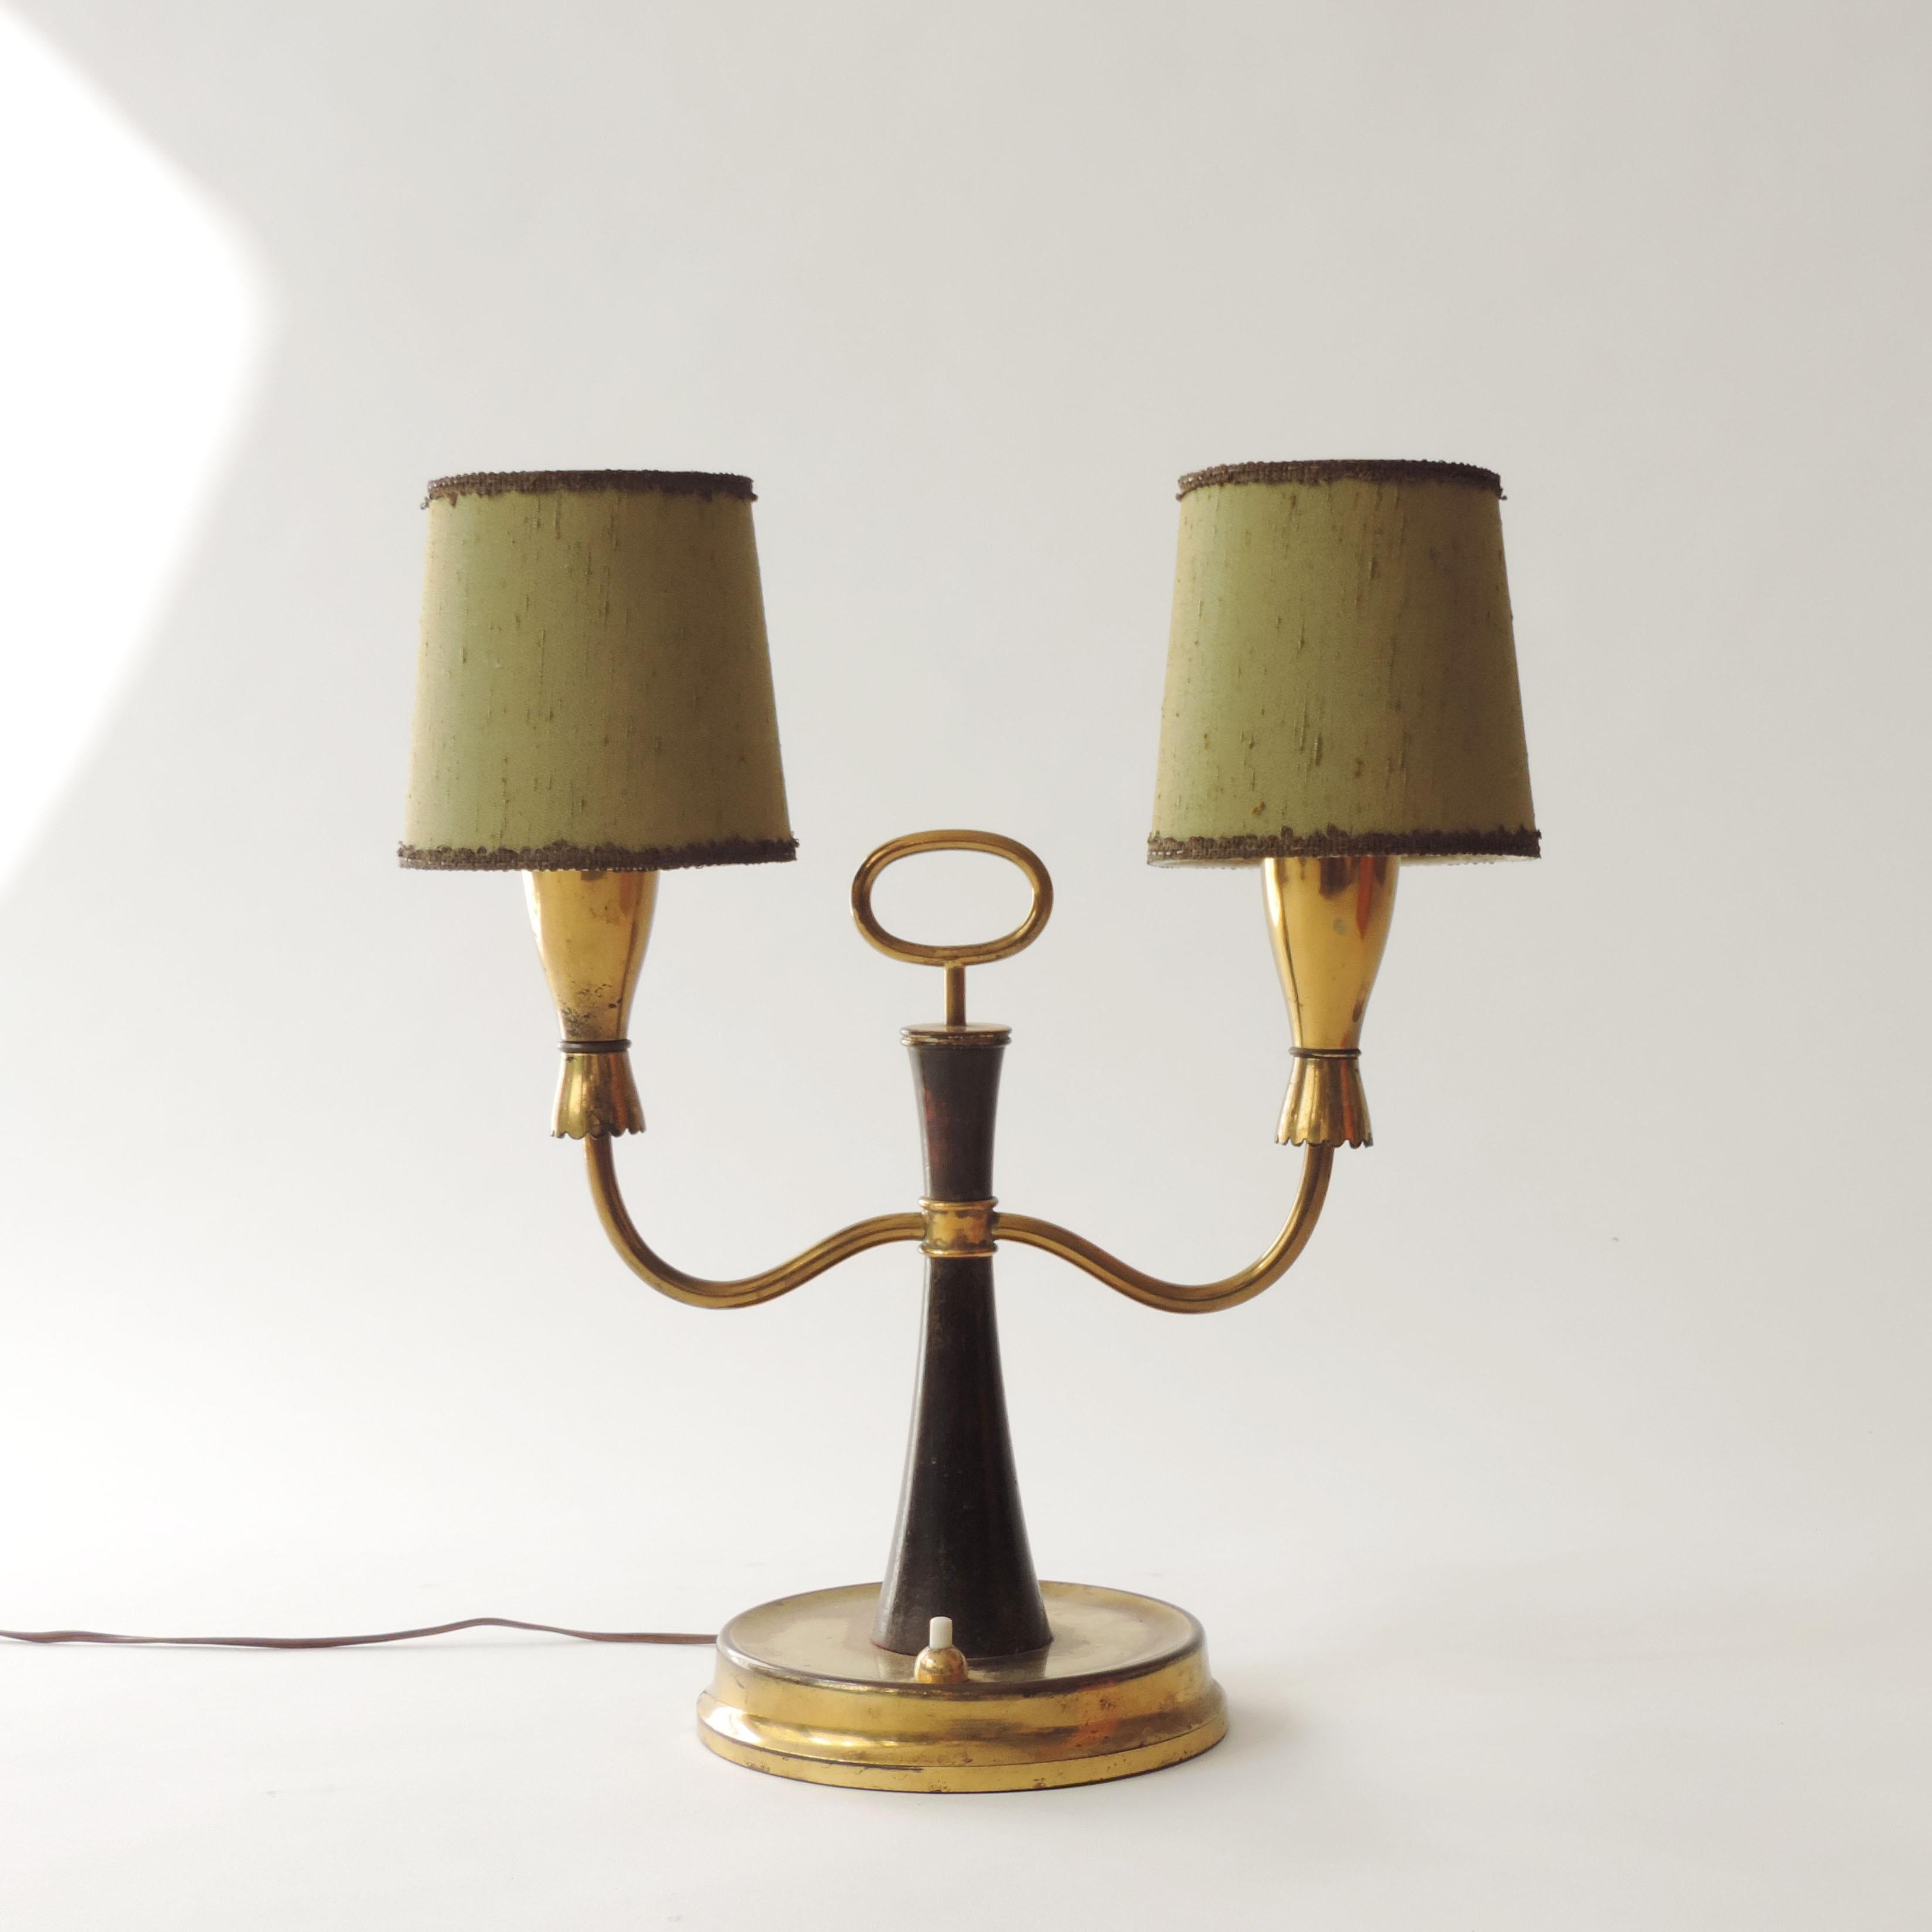 Italian 1950s two light table lamp in wood and brass
Attributed to Cesare Lacca.